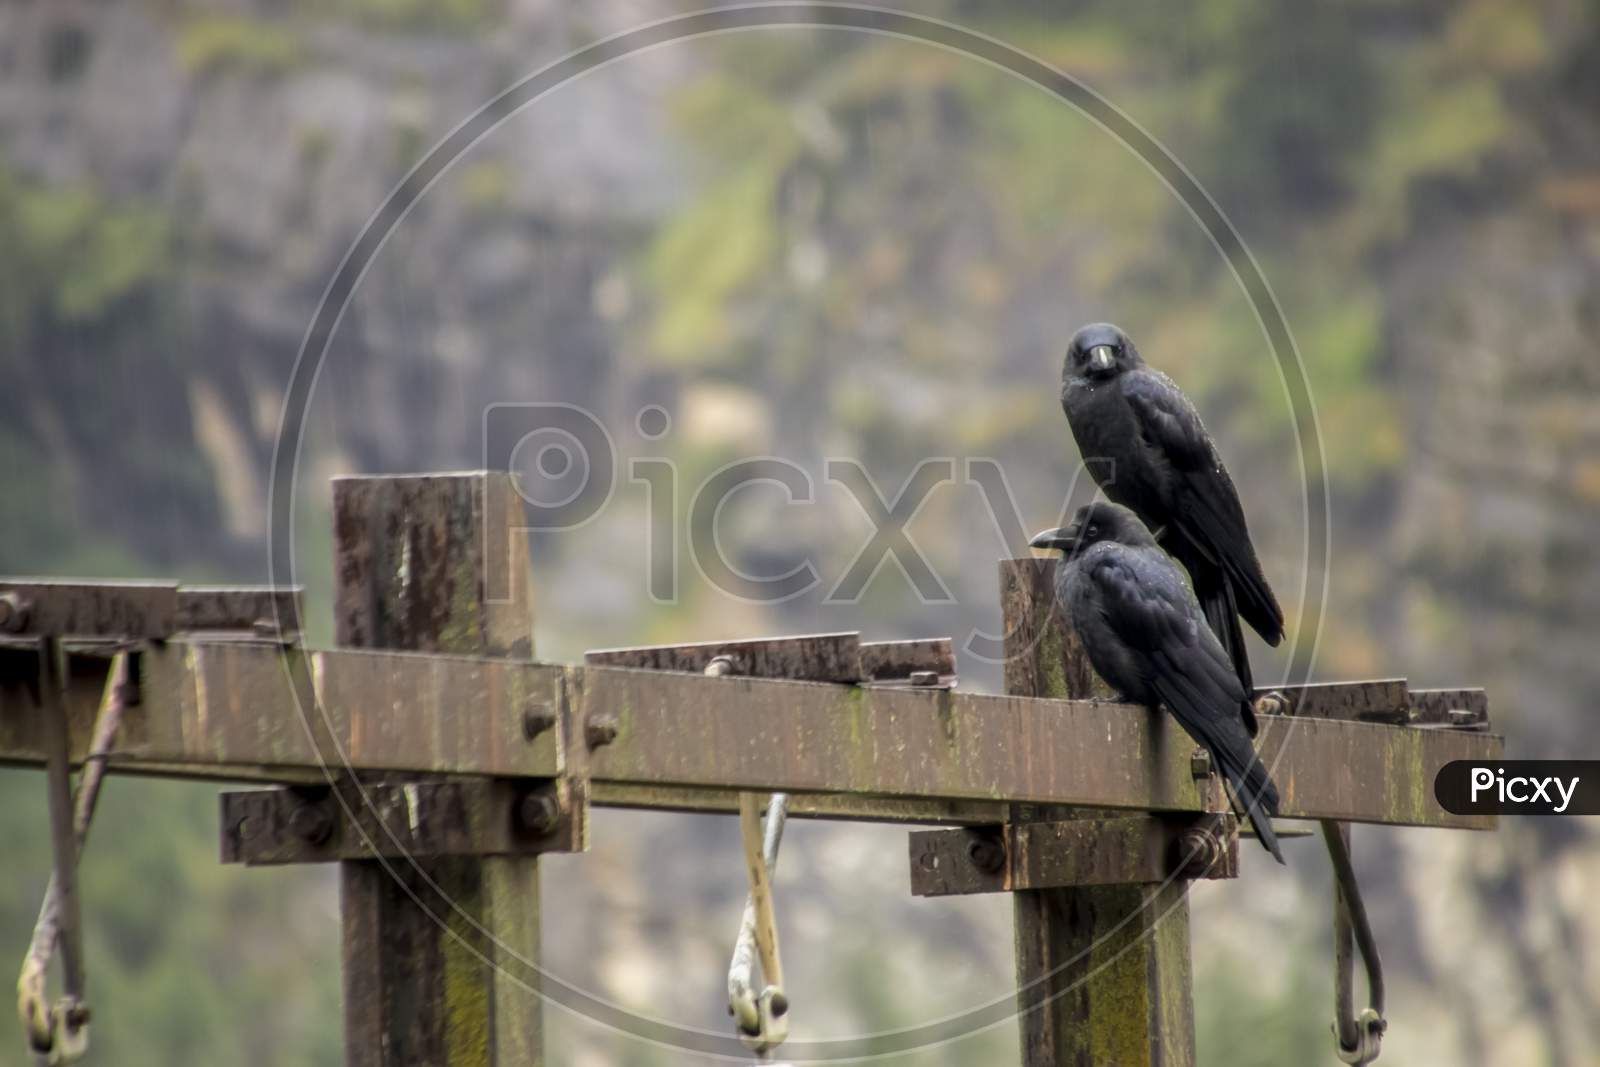 A pair of crows sitting on an electric pole.